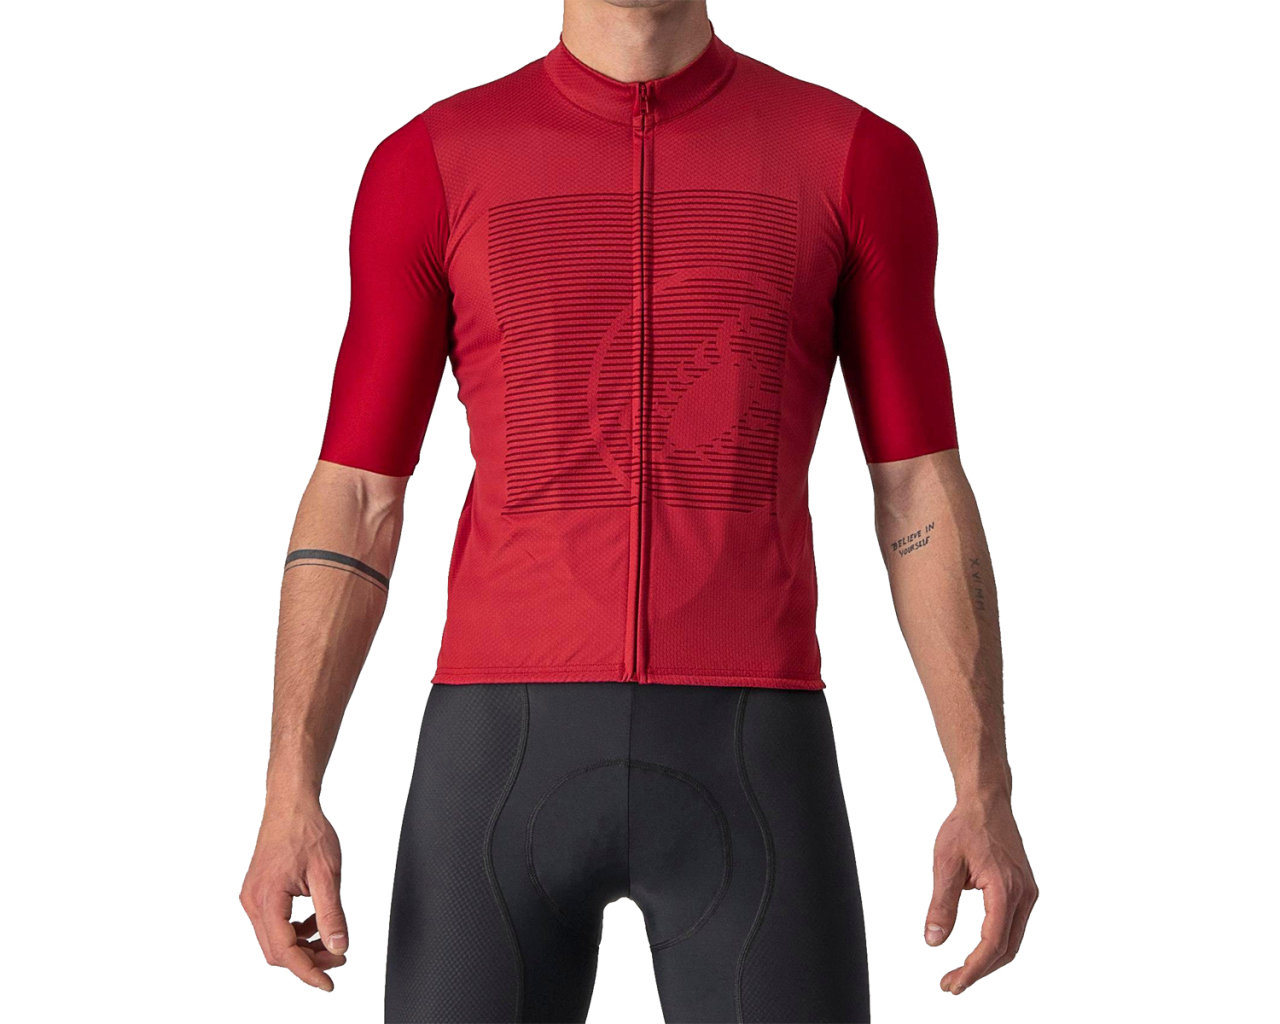 Castelli Bagarre Short Sleeve Cycling Jersey - SS22 | Merlin Cycles